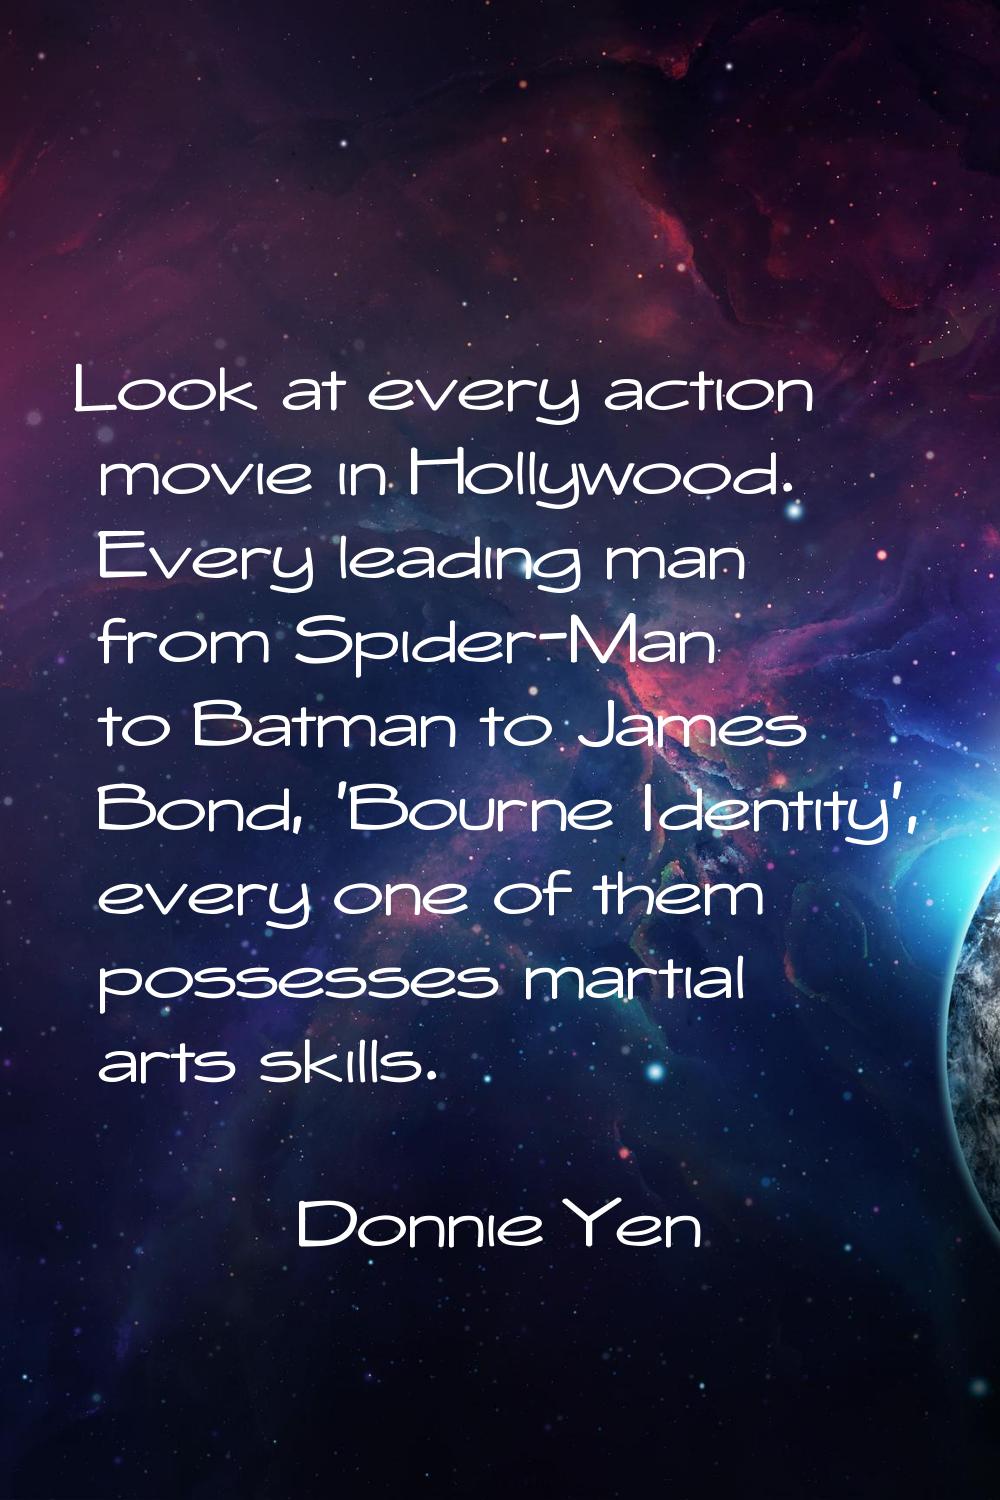 Look at every action movie in Hollywood. Every leading man from Spider-Man to Batman to James Bond,